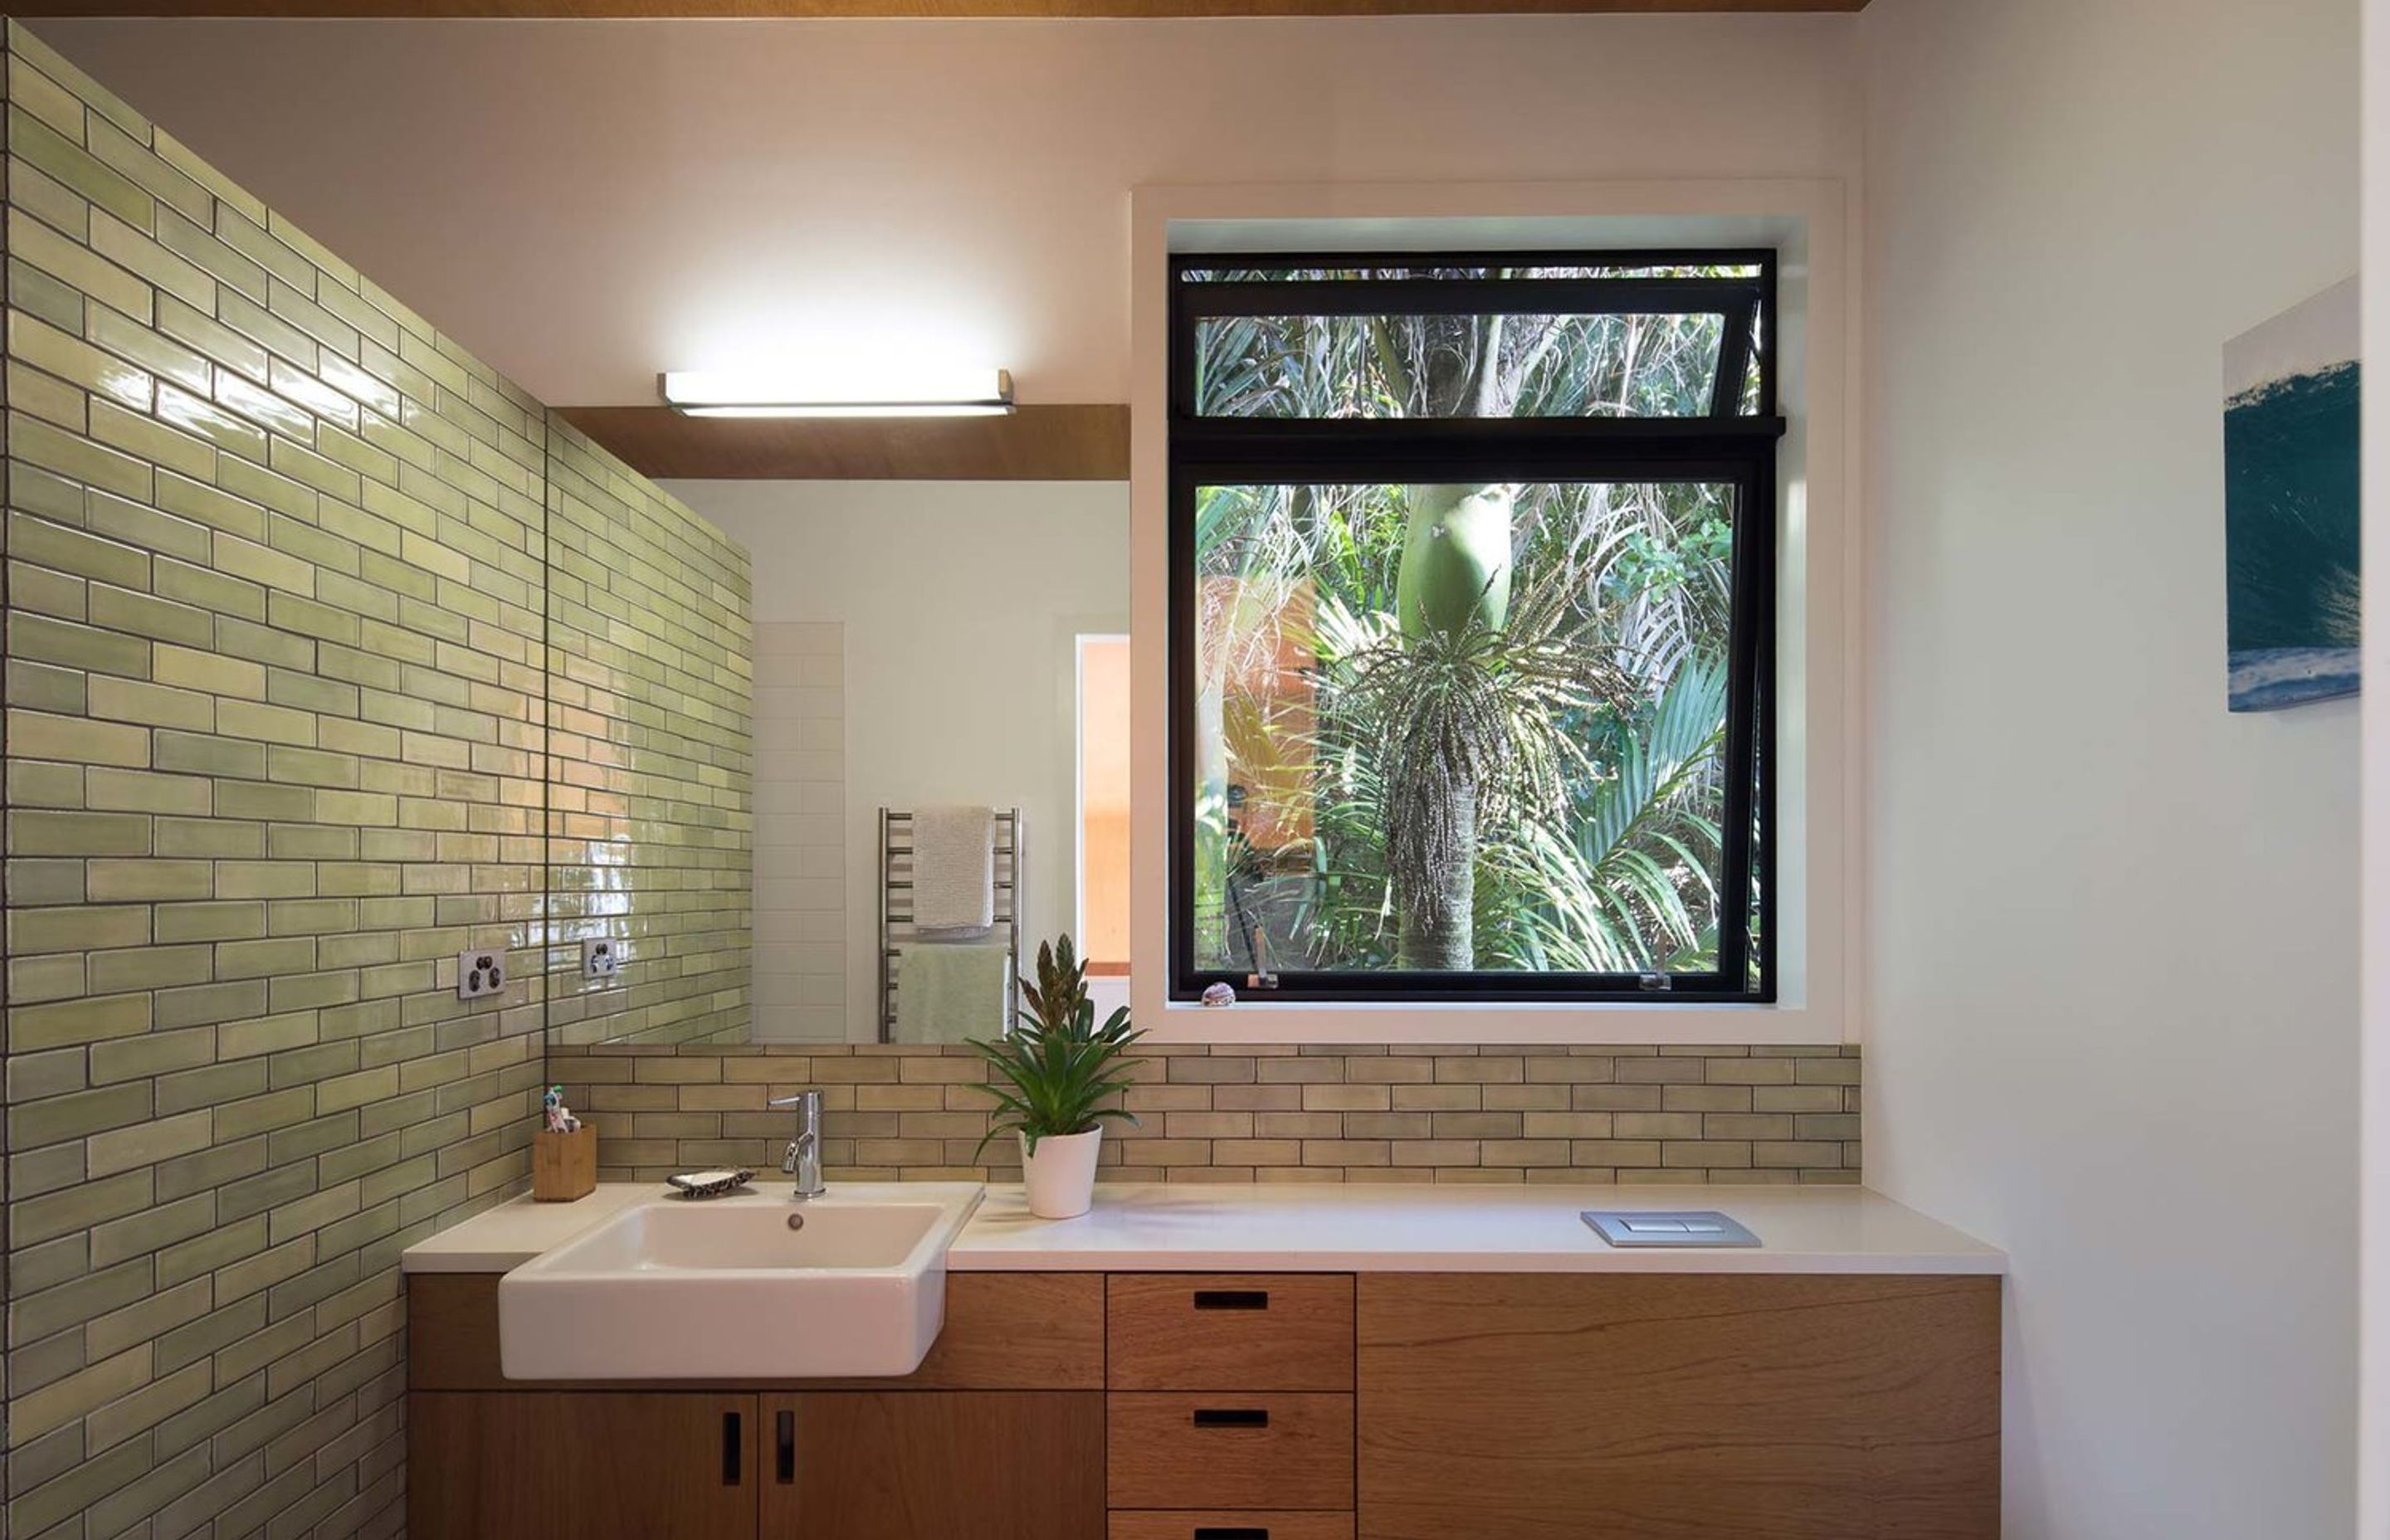 Use of green tiles connects the bathroom spaces with the outside environment, bringing the ‘outside’ to the ‘inside’.  